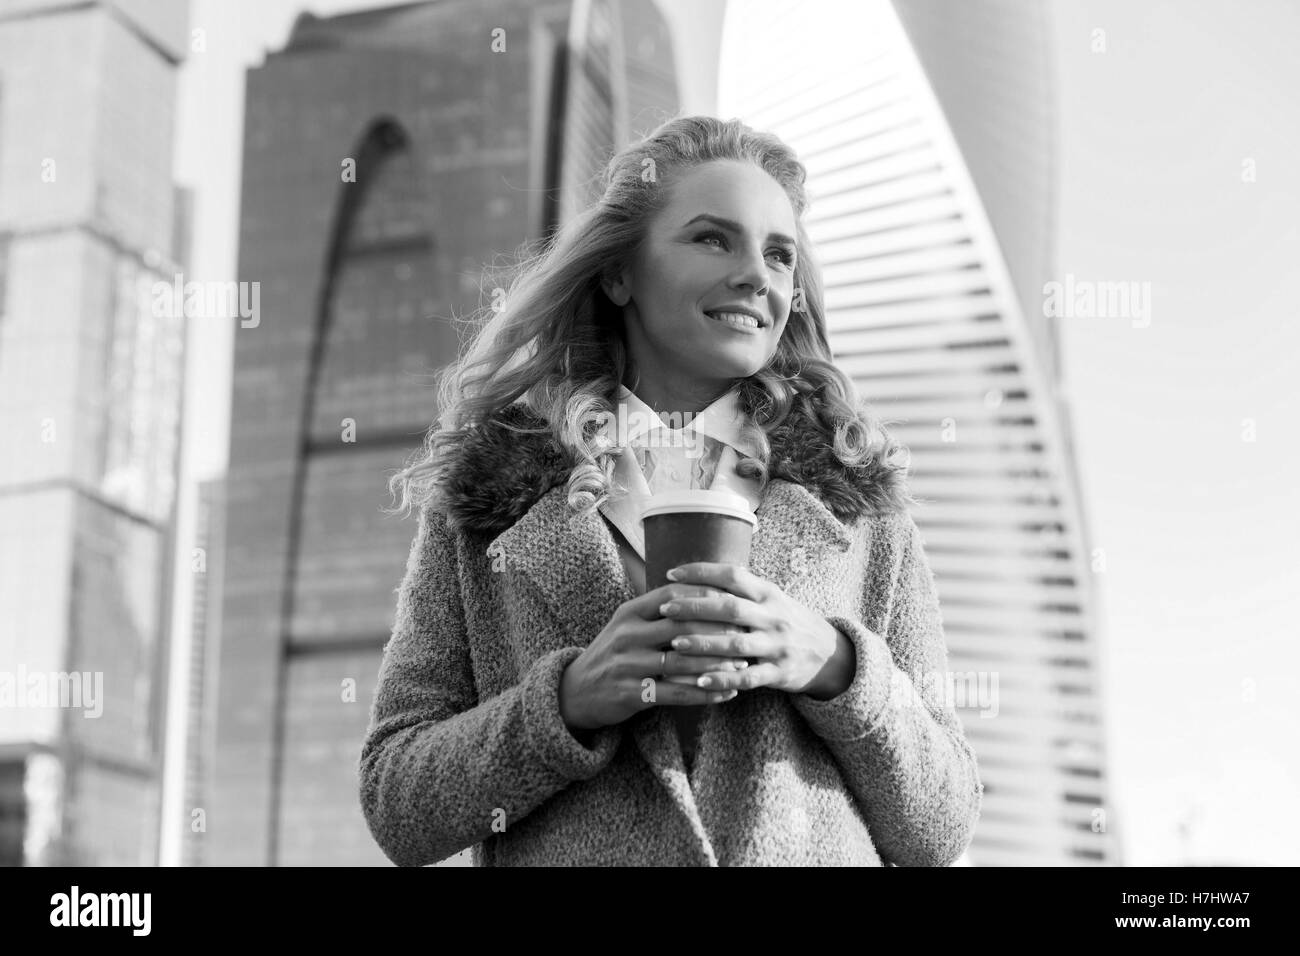 Black and white portrait of beatiful smiling woman with coffee Stock Photo